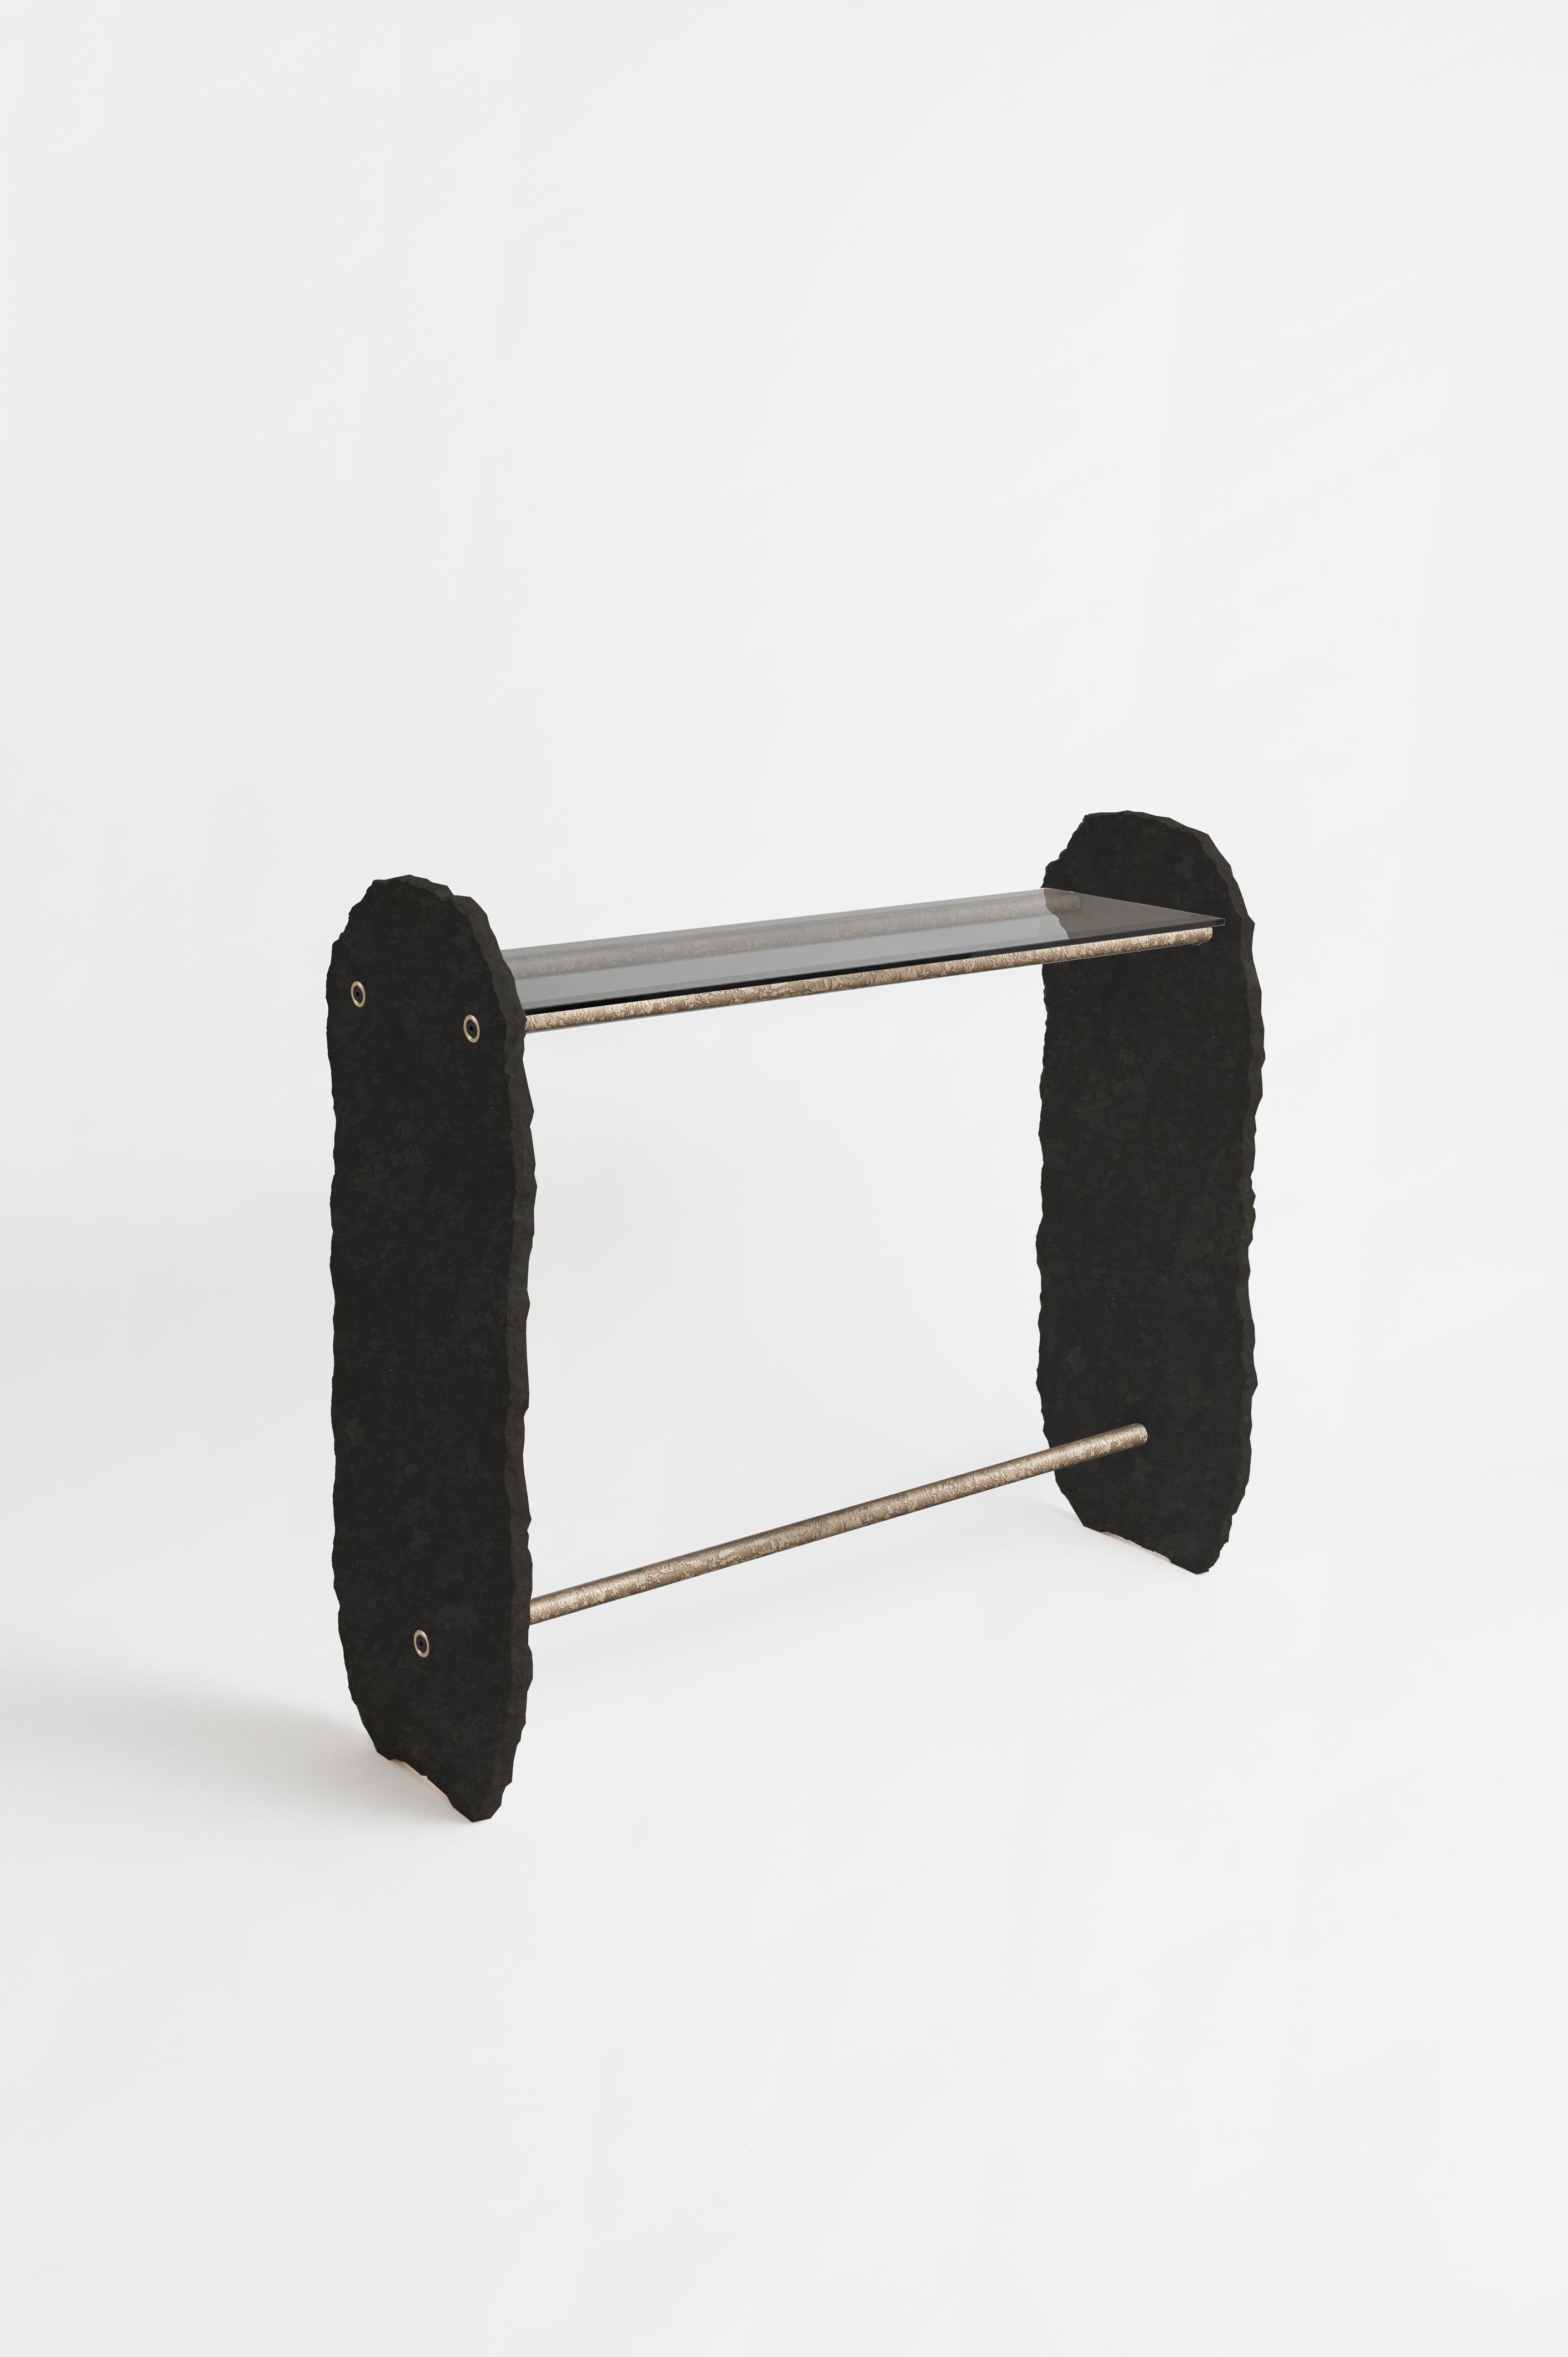 Stoique stole console signed by Fre´de´ric Saulou
Materials: Black stone, Grey smoked glass, metal powder-coated or engraved patinated brass.
Dimensions: H 110 x 40 x 110 cm.

